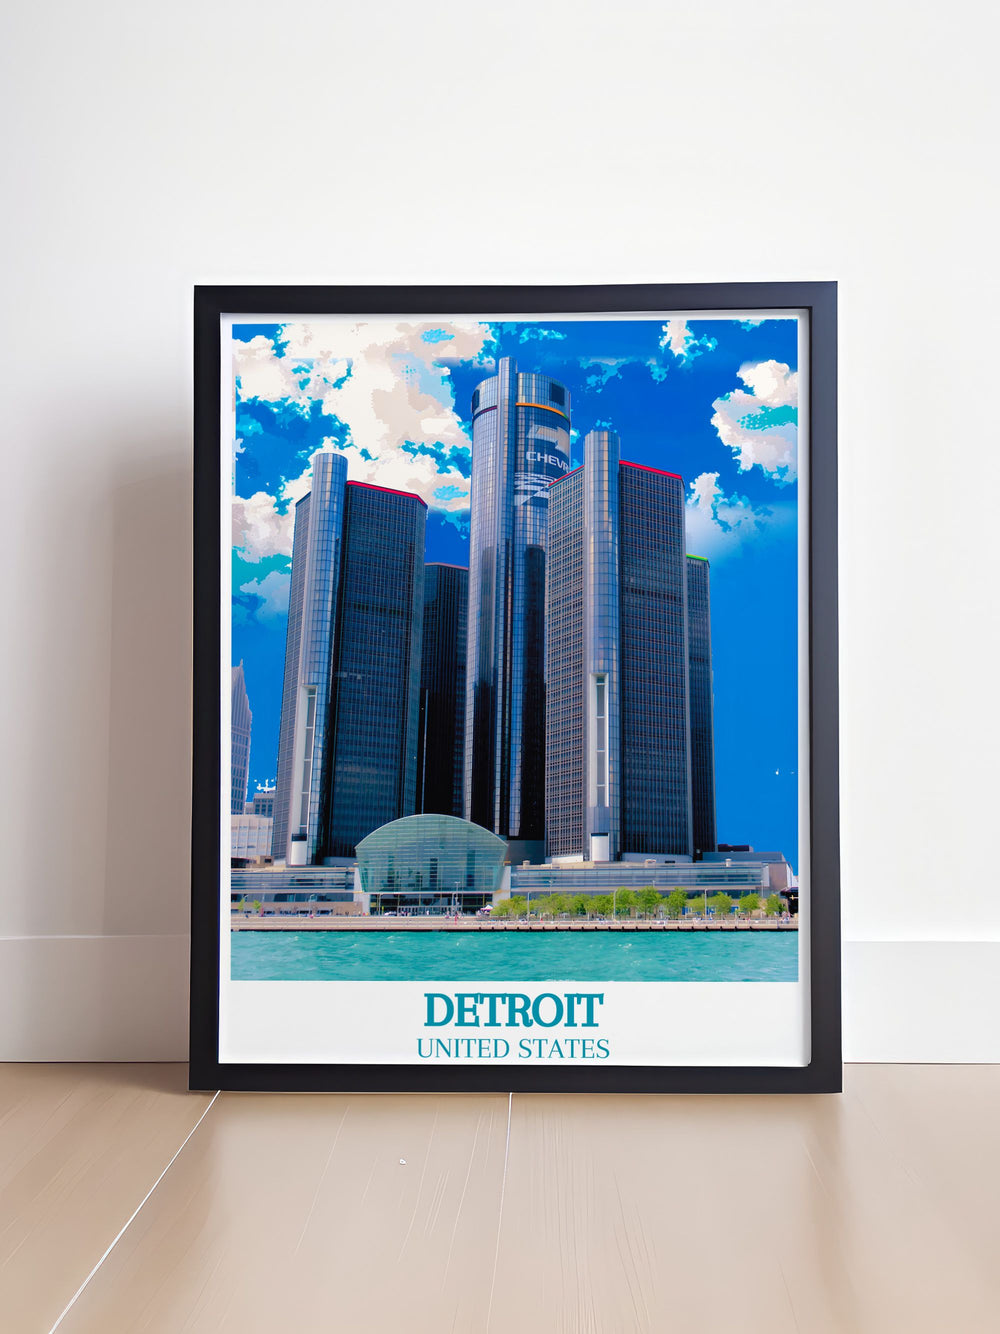 Home decor print illustrating the scenic beauty of The Renaissance Center in Detroit, highlighting the architectural marvels and cultural landmarks of Michigans Motor City.